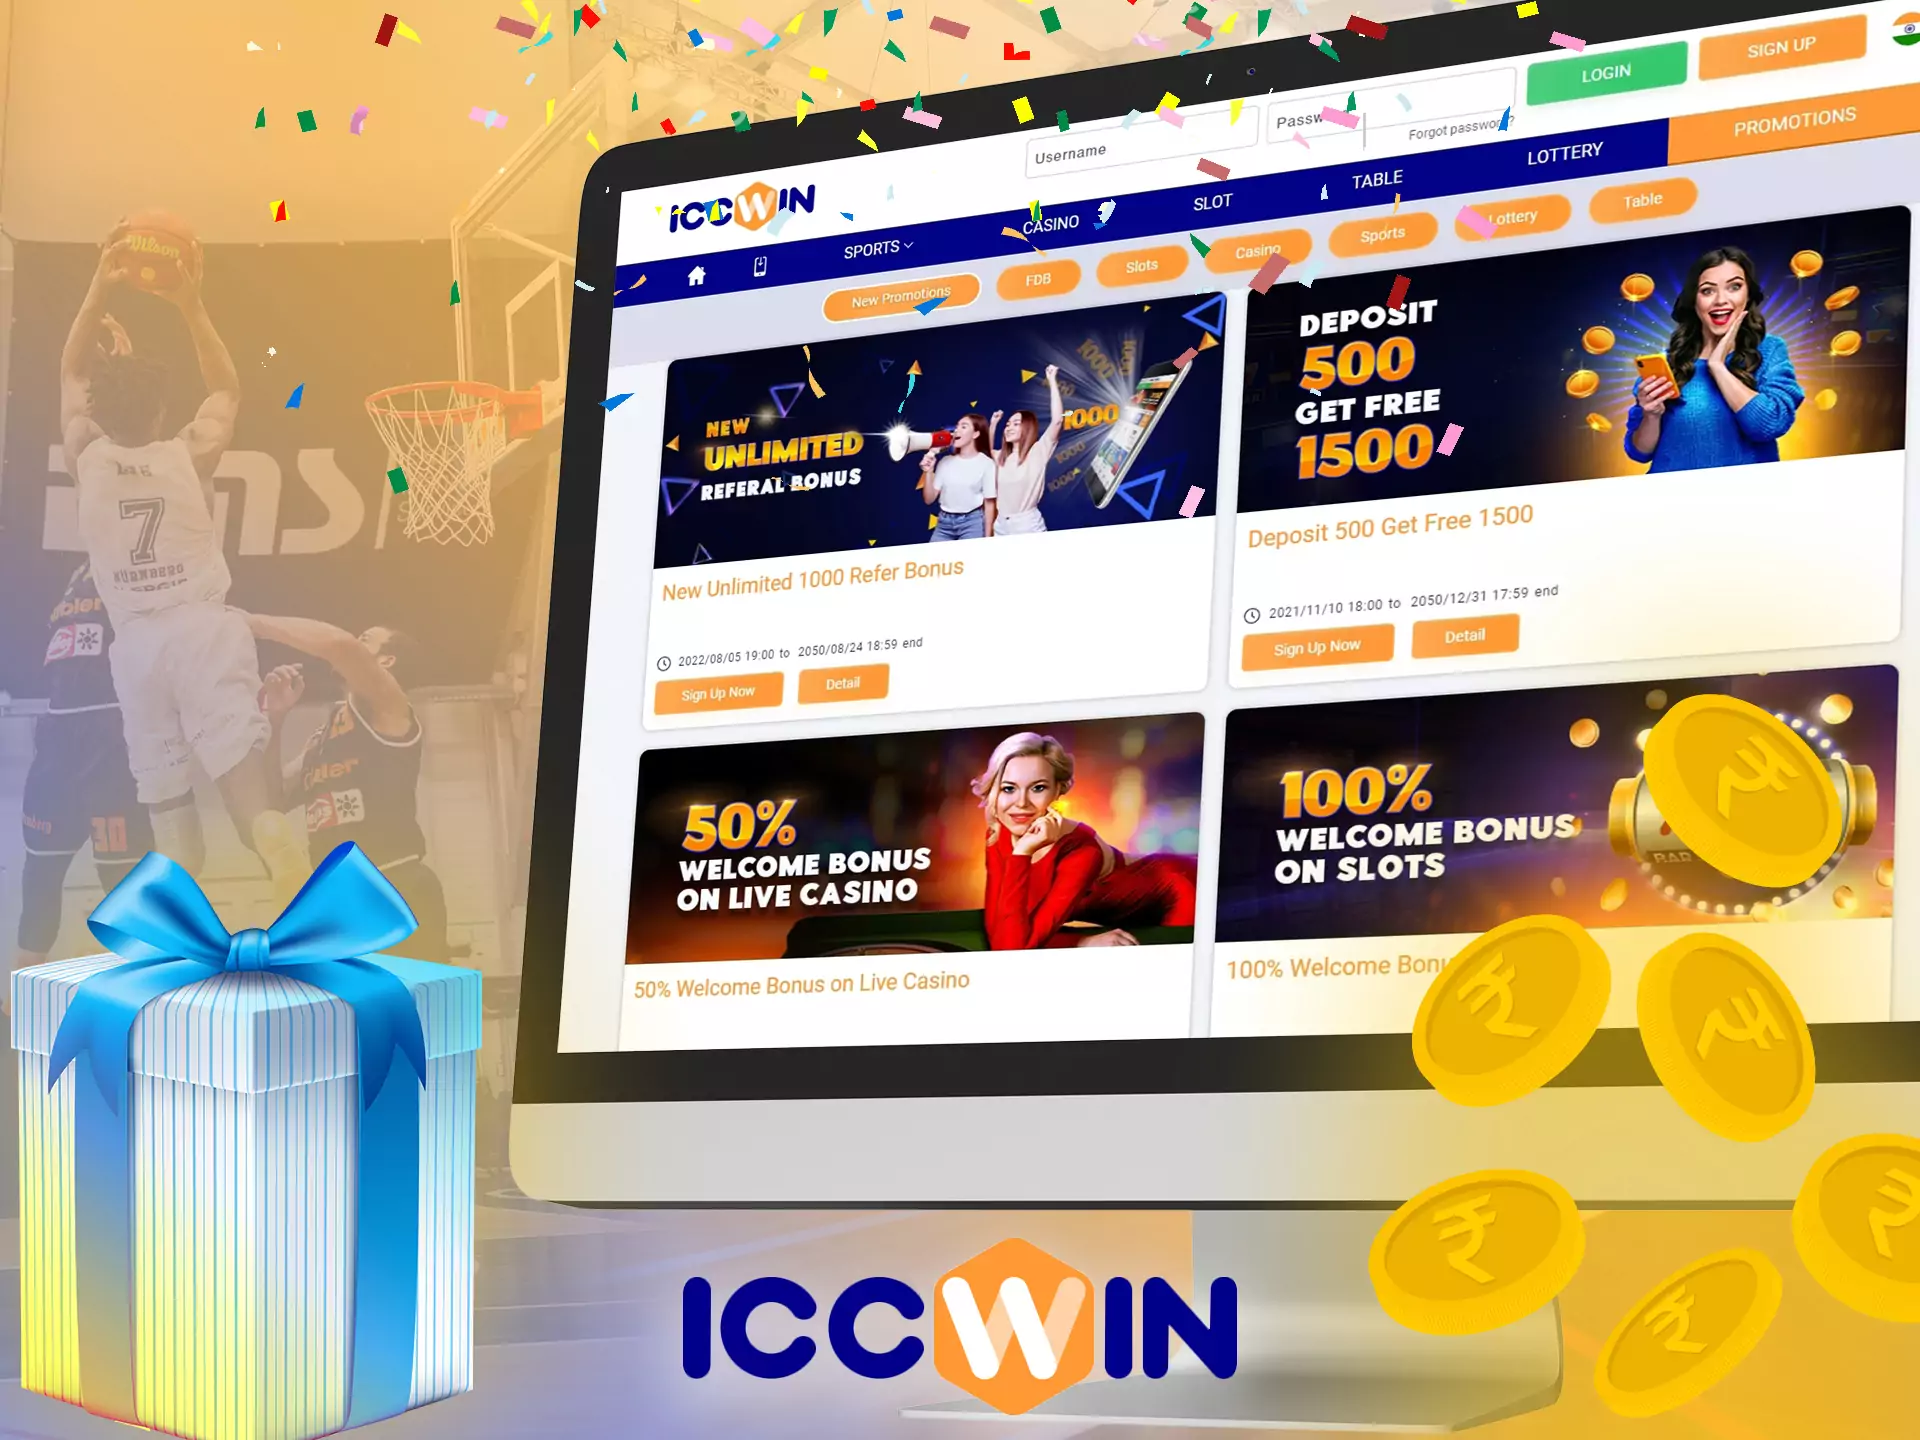 We don't have a special promo code for the ICCWin website yet.